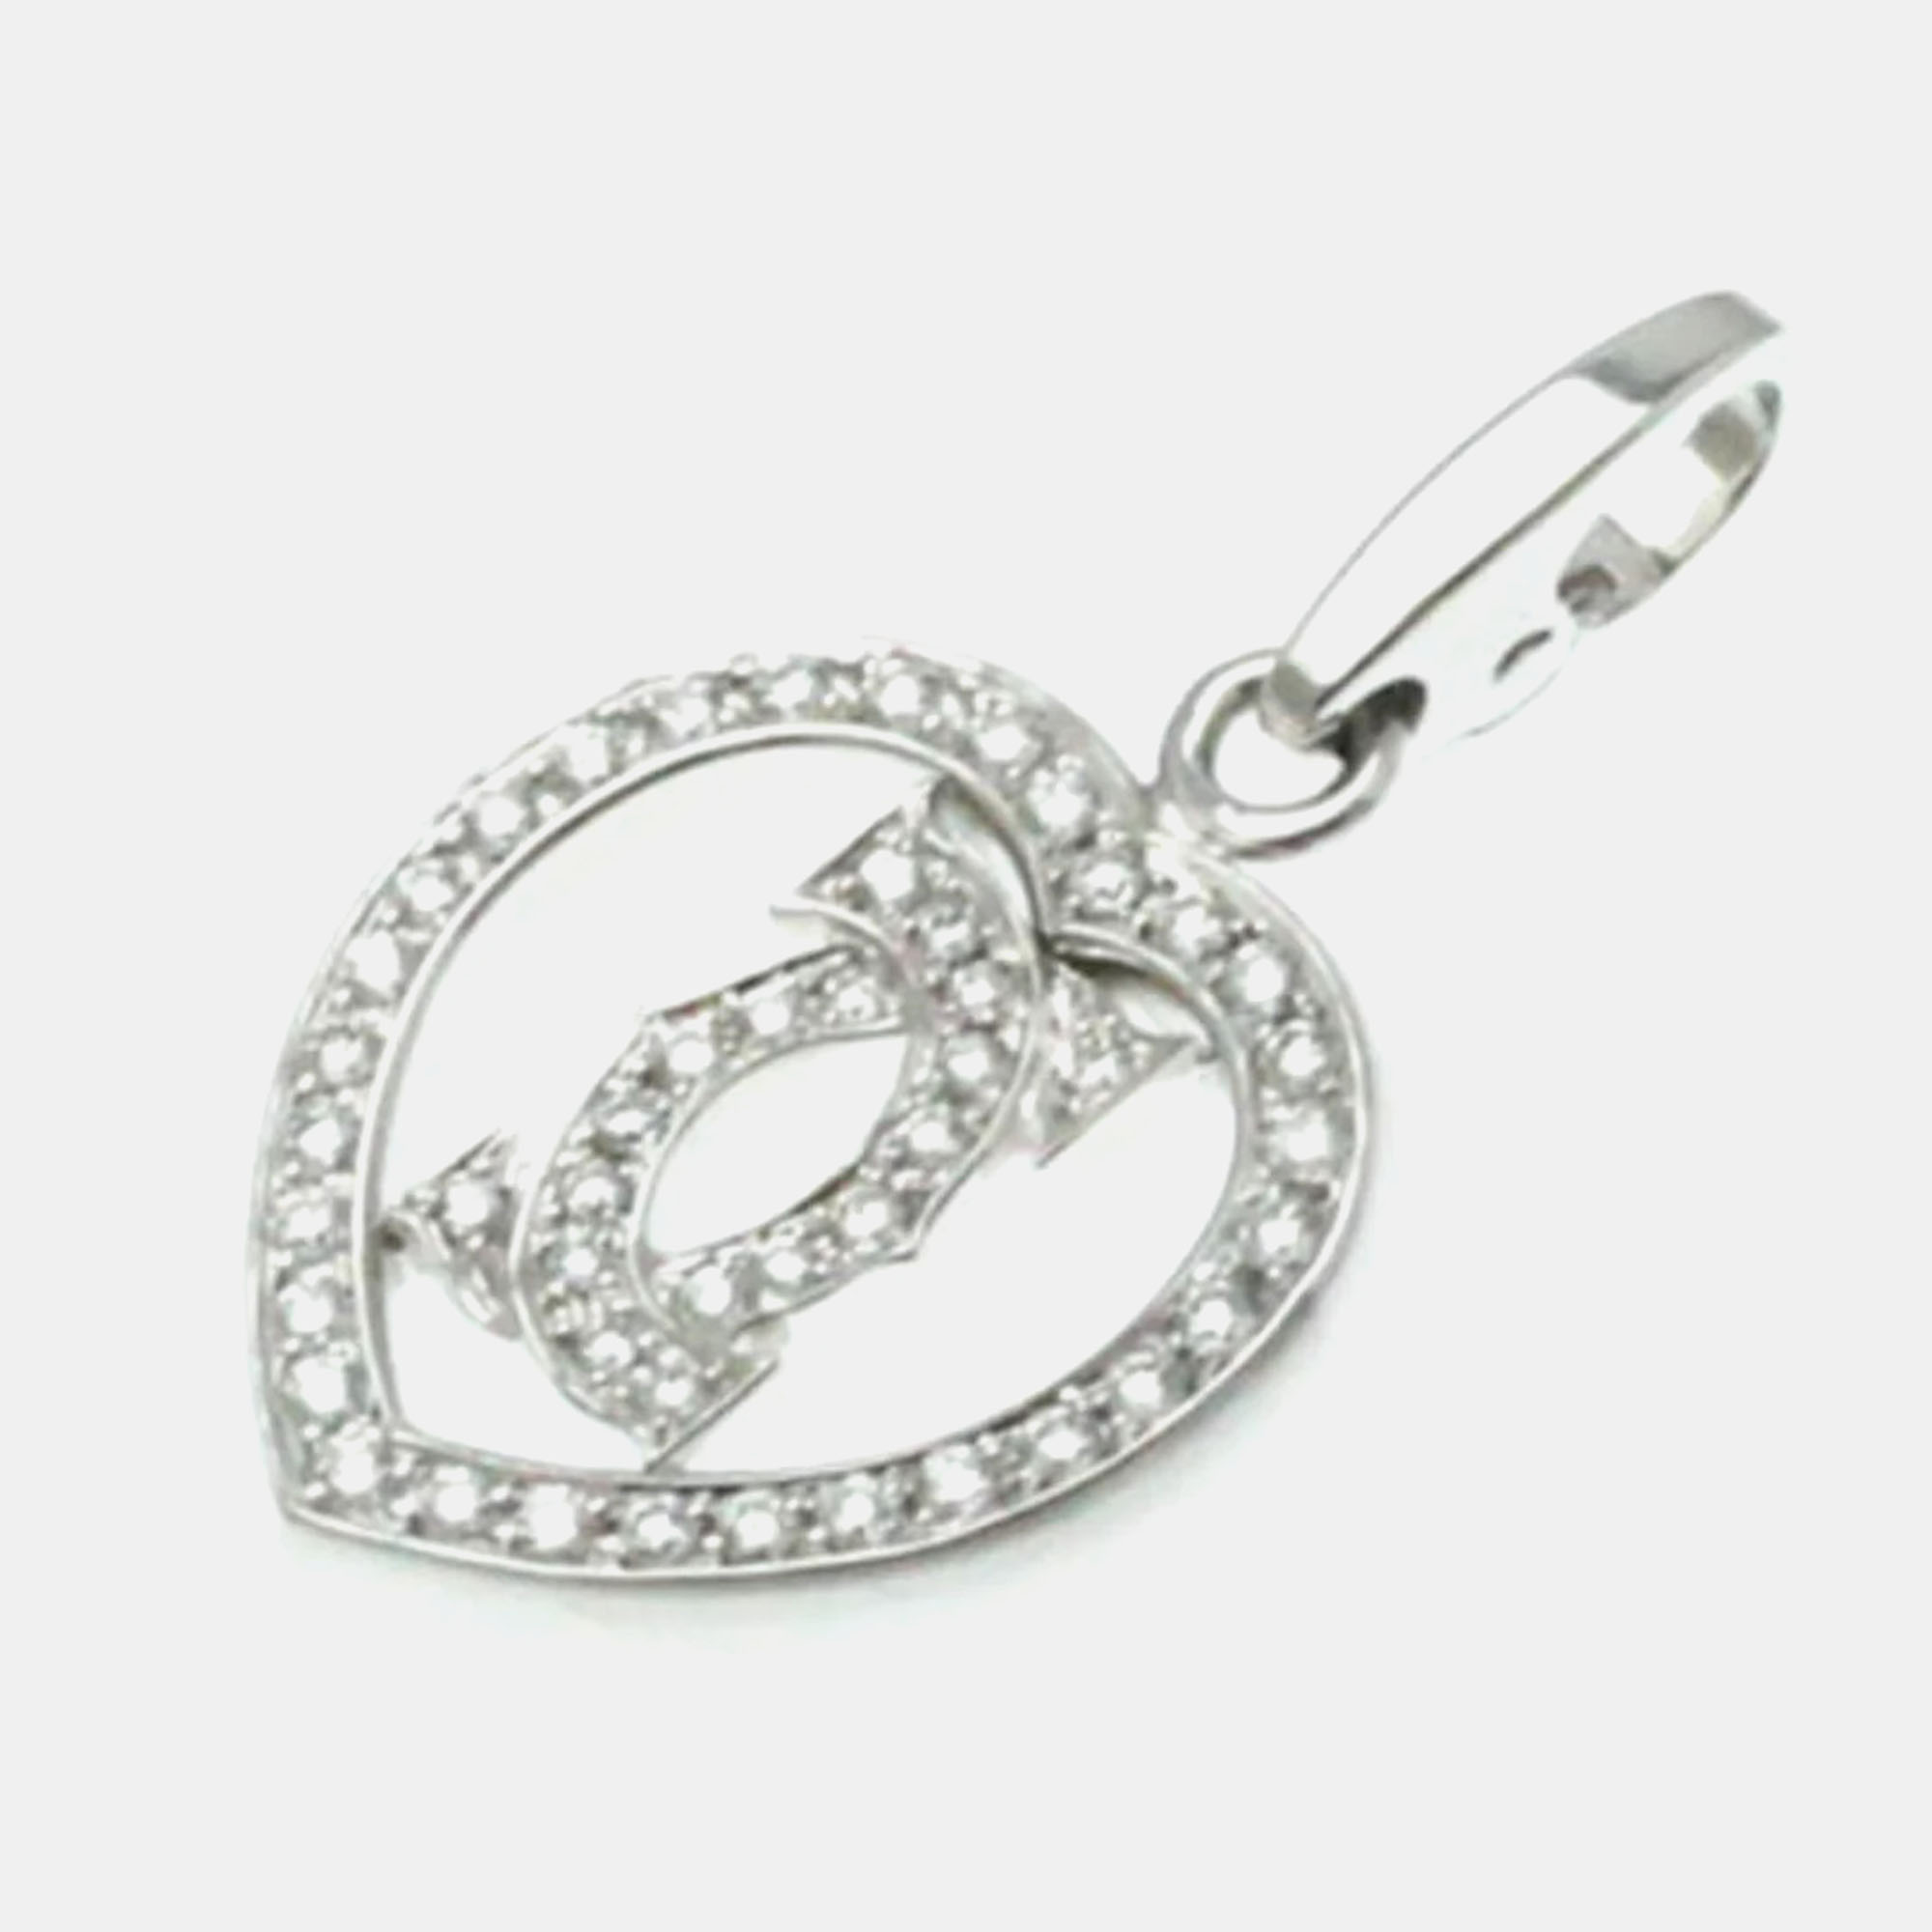 Cartier 18k white gold and diamond double c heart charm